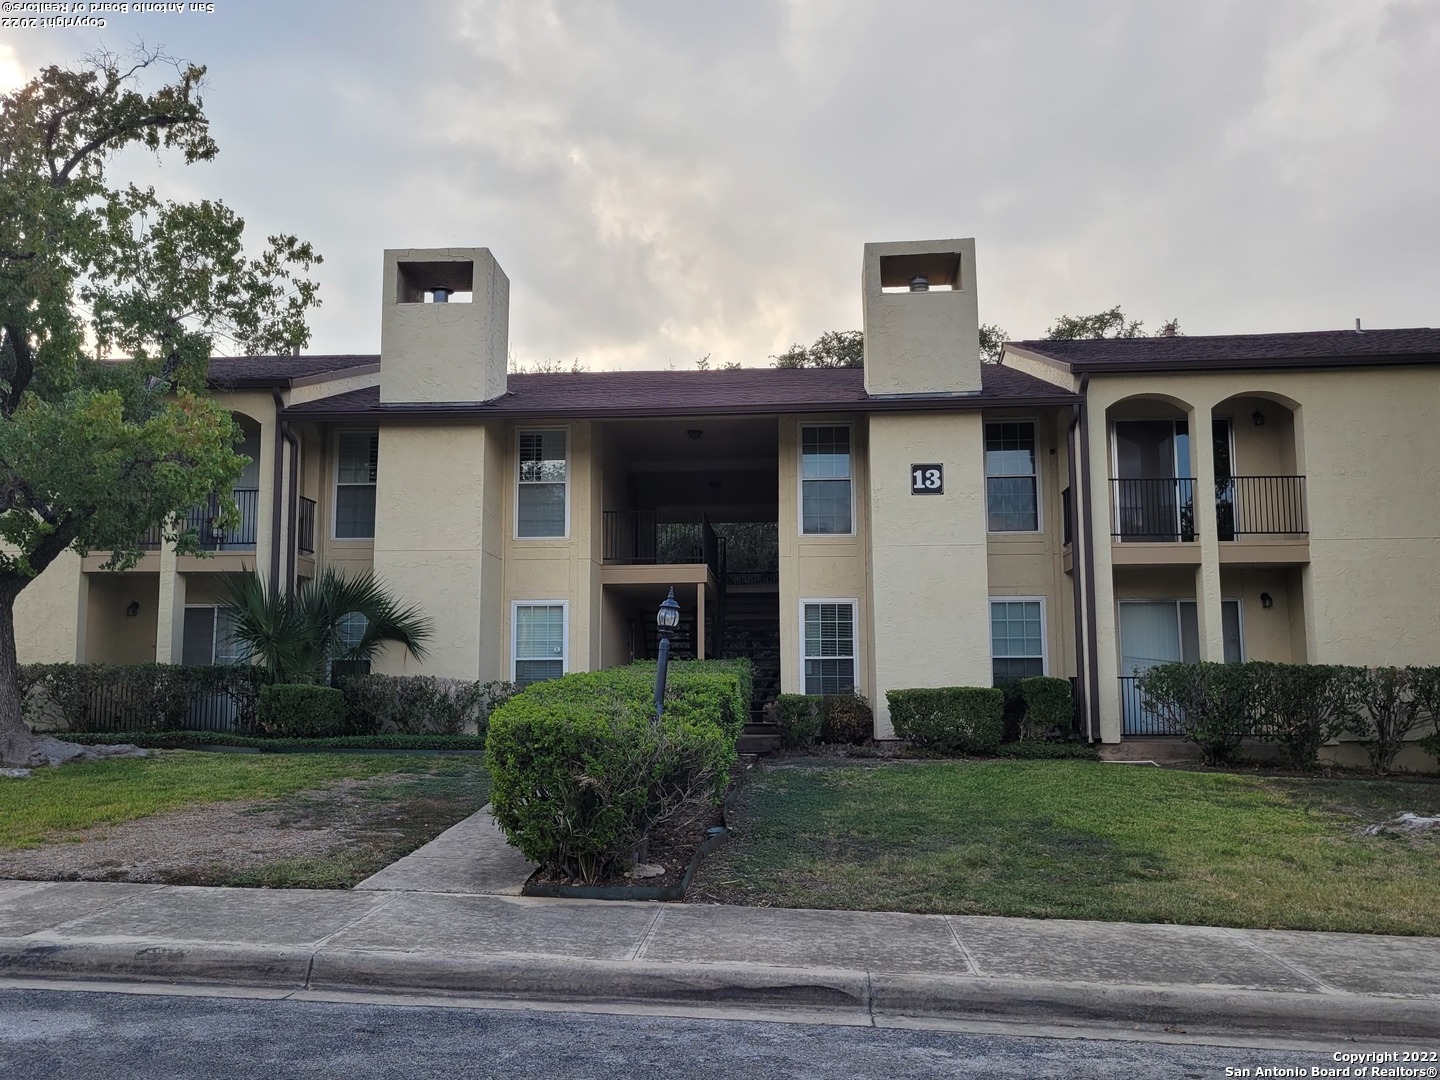 Rare opportunity to buy a 3 bdrm-2 bath condo within walking distance to Northeast Baptist Hospital and bus line! Condo overlooks the tree shaded 2-car carport; Bldg 13 is next to office and mailroom; enjoy the clubhouse; unit has no carpet; enjoy the living/dining room with wetbar, hardwood floor and wood burning FP; unit is on 2nd floor and shaded by tall oak trees; kt/bk has ceramic tile floor; kt features solid counter tops, ref., smooth cooktop range; washer & dryer in master bdrm WIC closet; 2 balconies! tree shaded 14x6 balcony off LR/DR; front bdrm with 11x5 balcony; on site management!